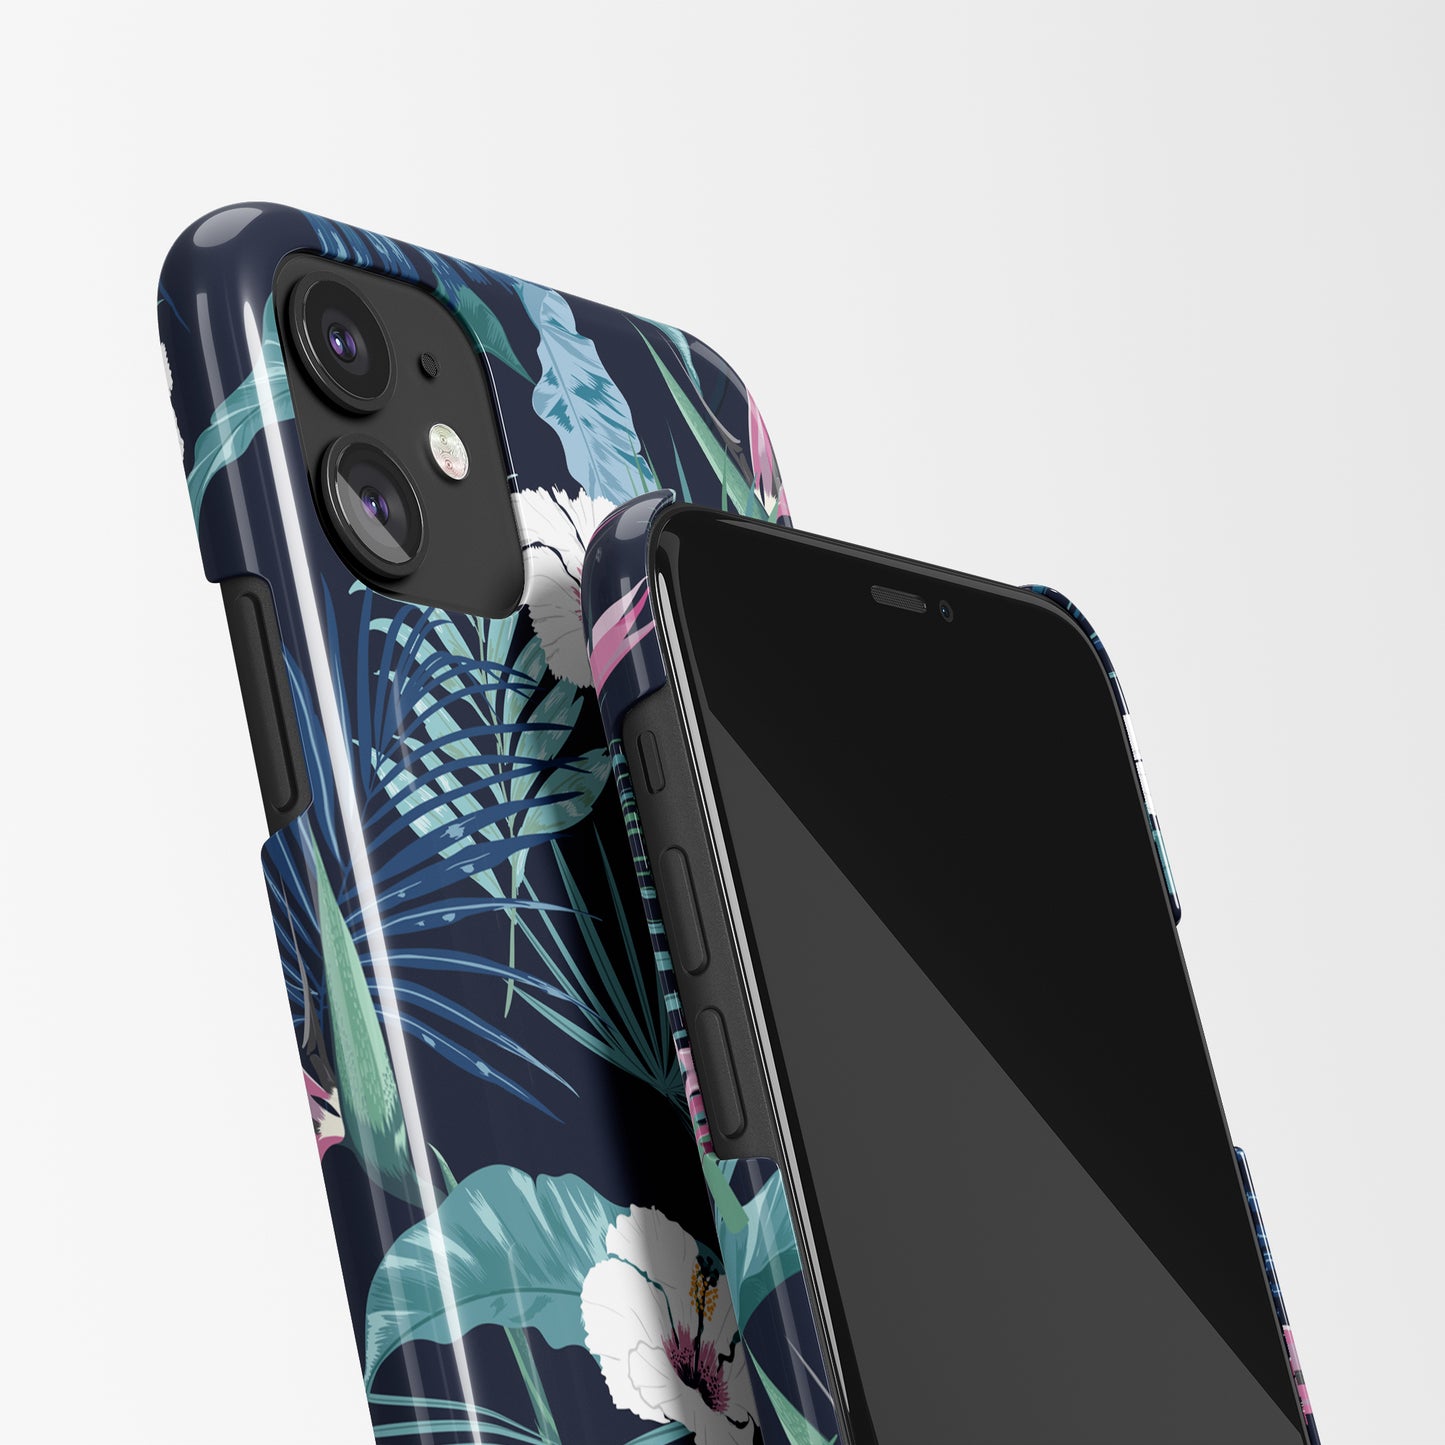 Beautiful iPhone Case with Floral Art Print